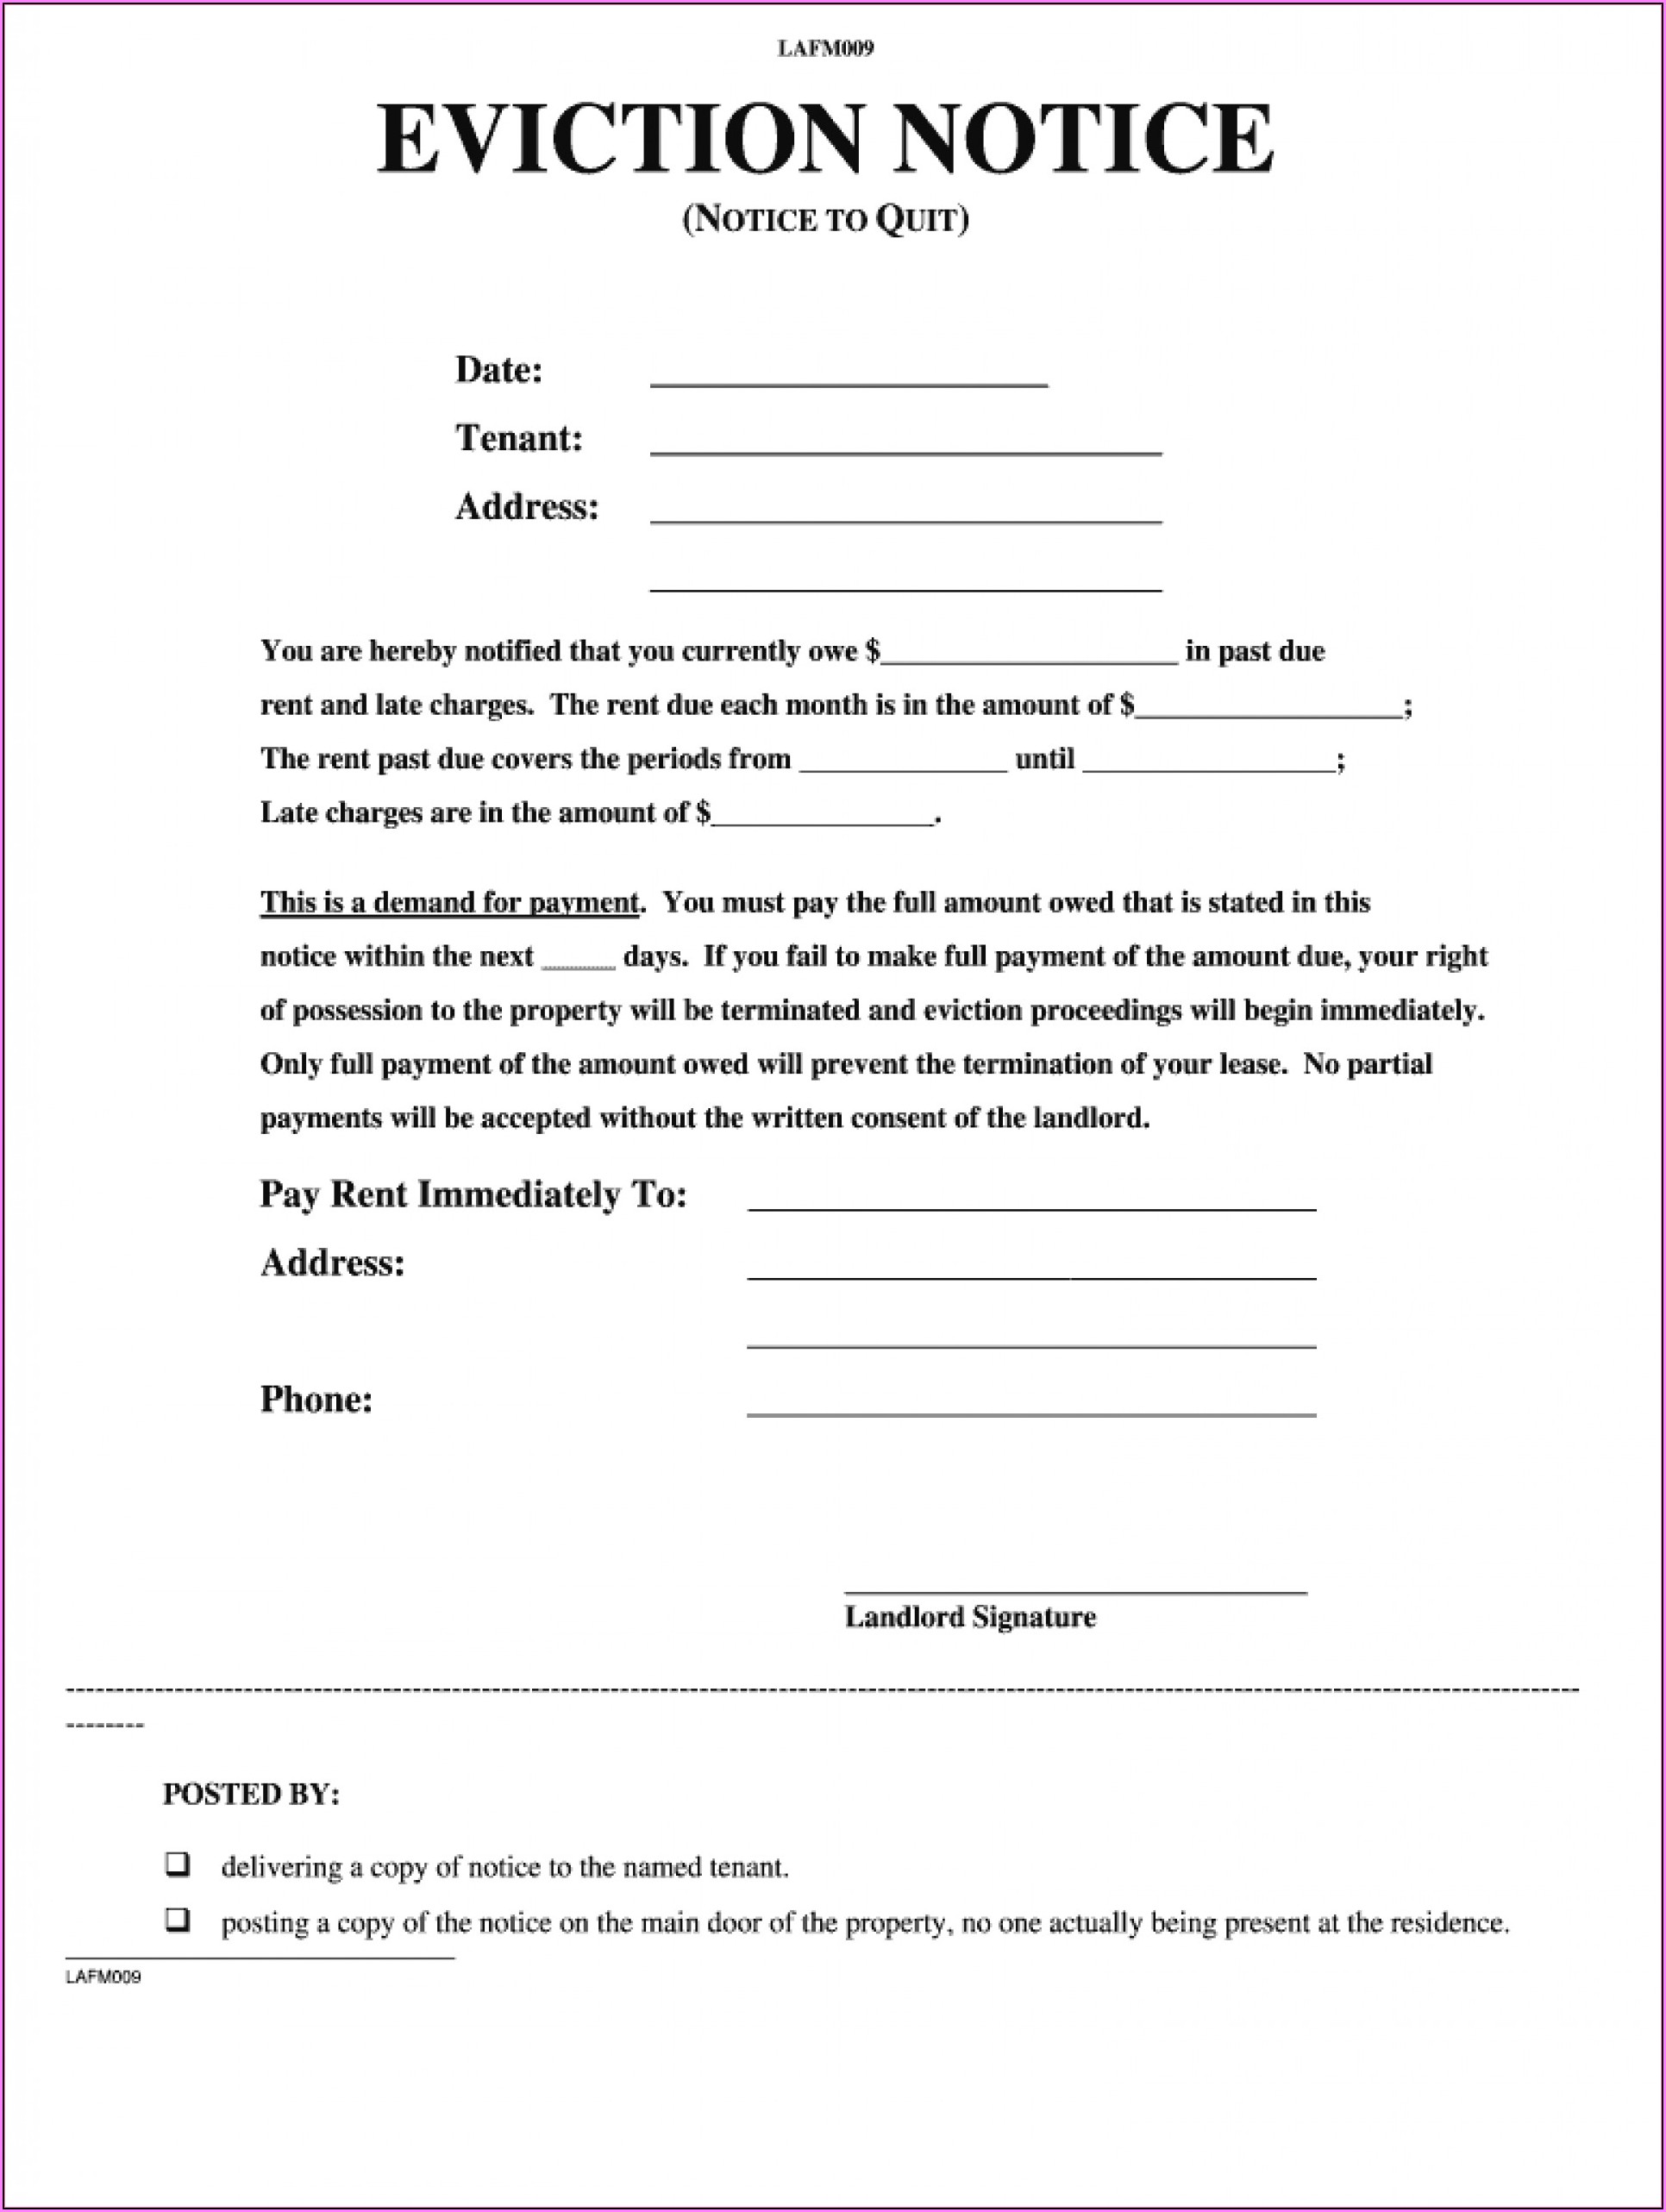 lodger-eviction-notice-template-california-template-1-free-illinois